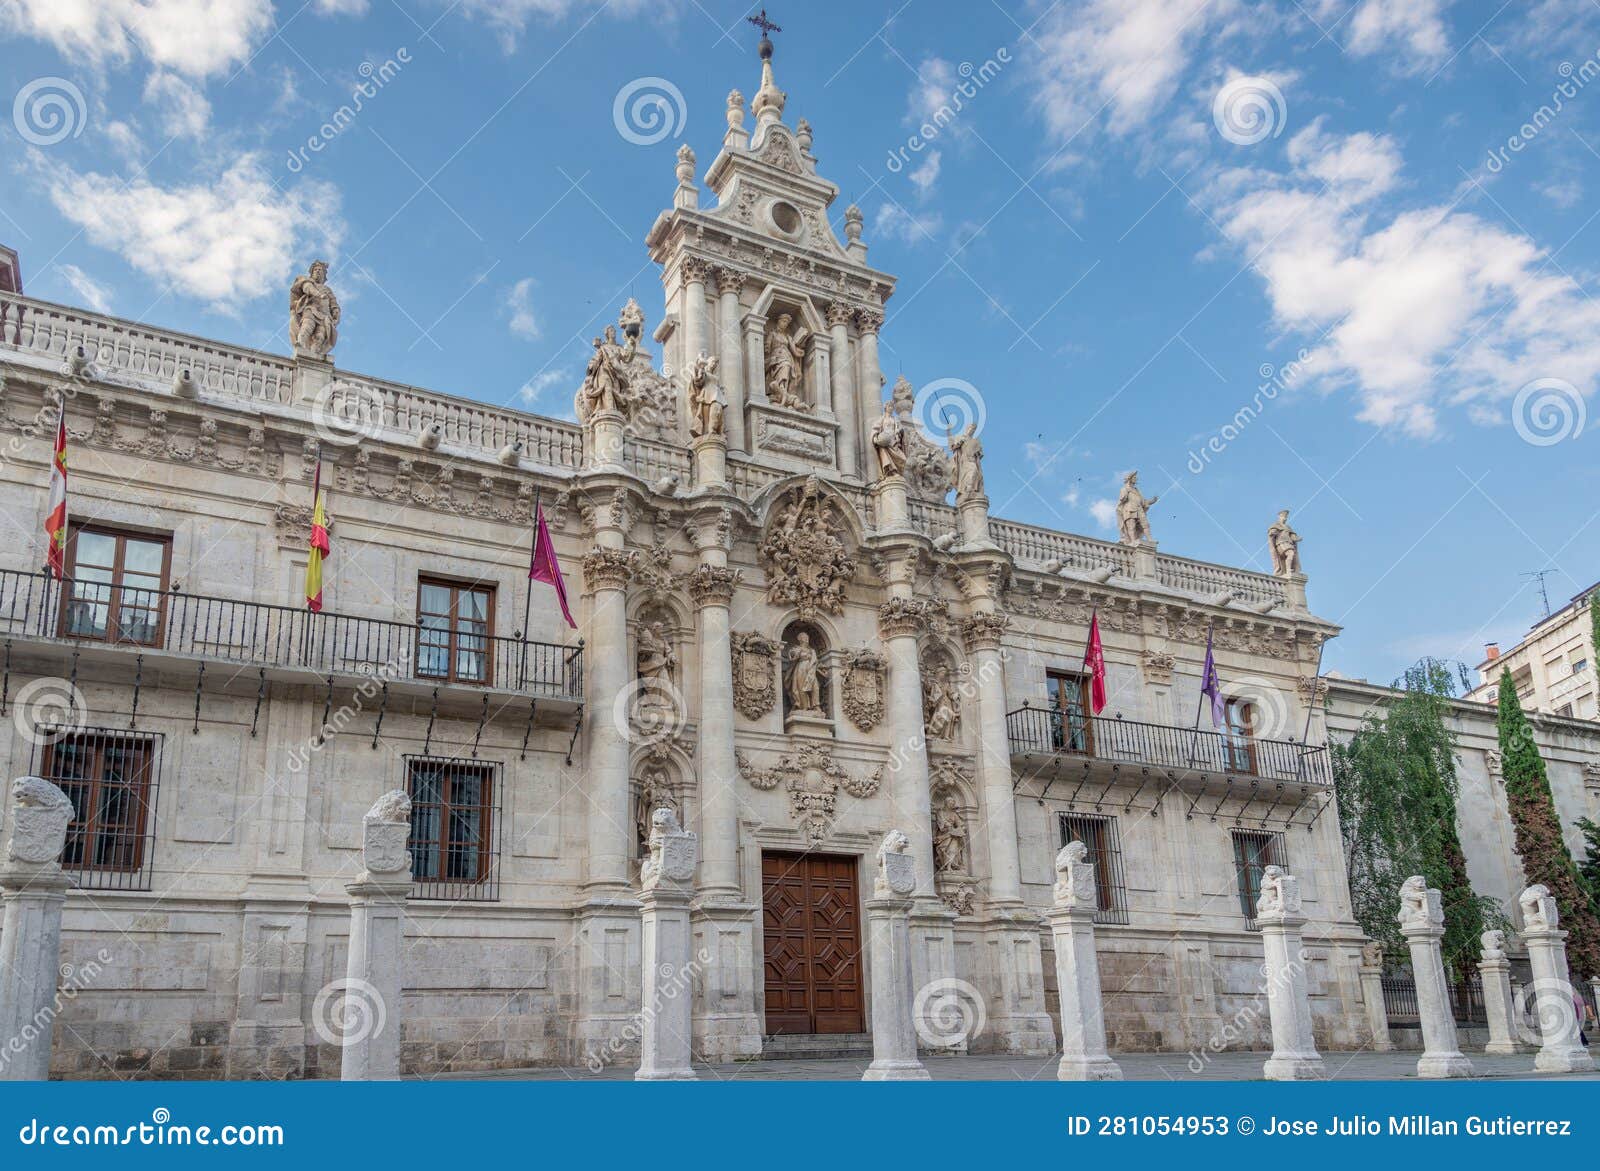 valladolid historical and cultural city of spain